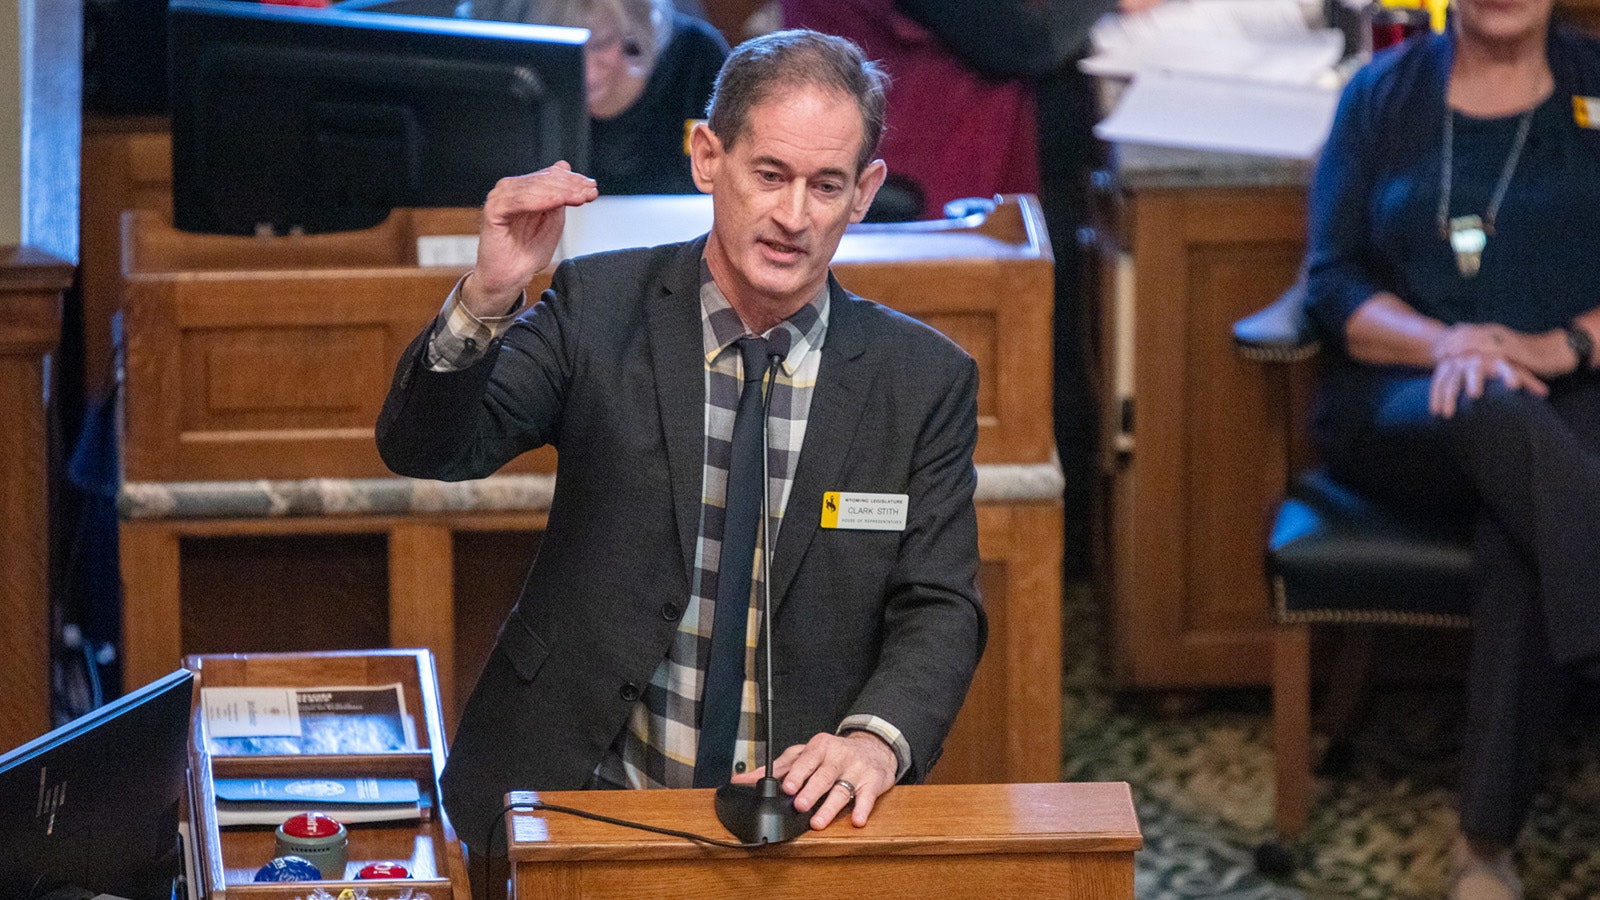 State Rep. Clark Stith, R-Rock Springs, said he first introduced legislation in 2021 creating harsher penalties for public officials who engage in misconduct. Here he talks about the subject on the House floor during the 2023 legislative session.